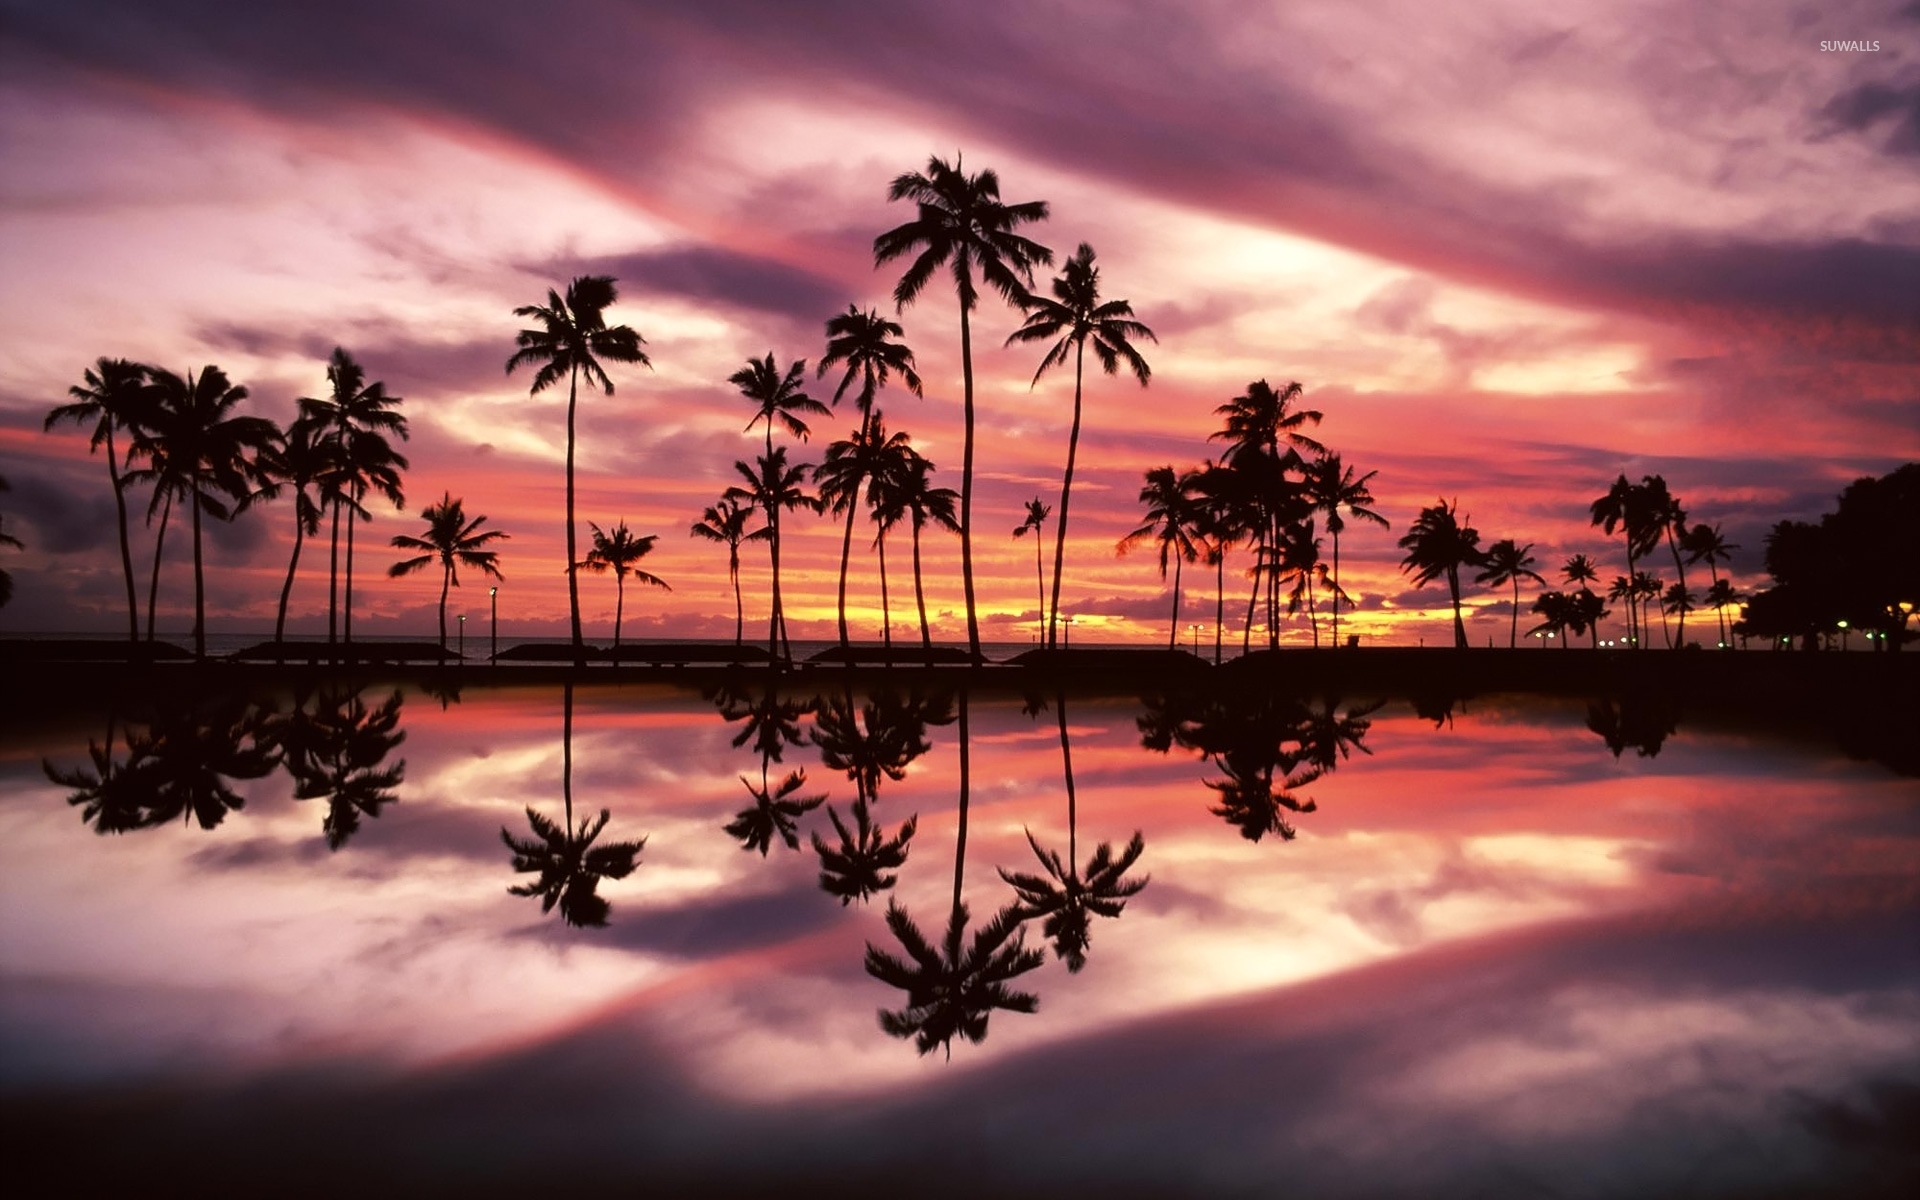 Beautiful Sunset Sky Behind The Palm Trees By The Ocean - Ocean And Palm Trees , HD Wallpaper & Backgrounds